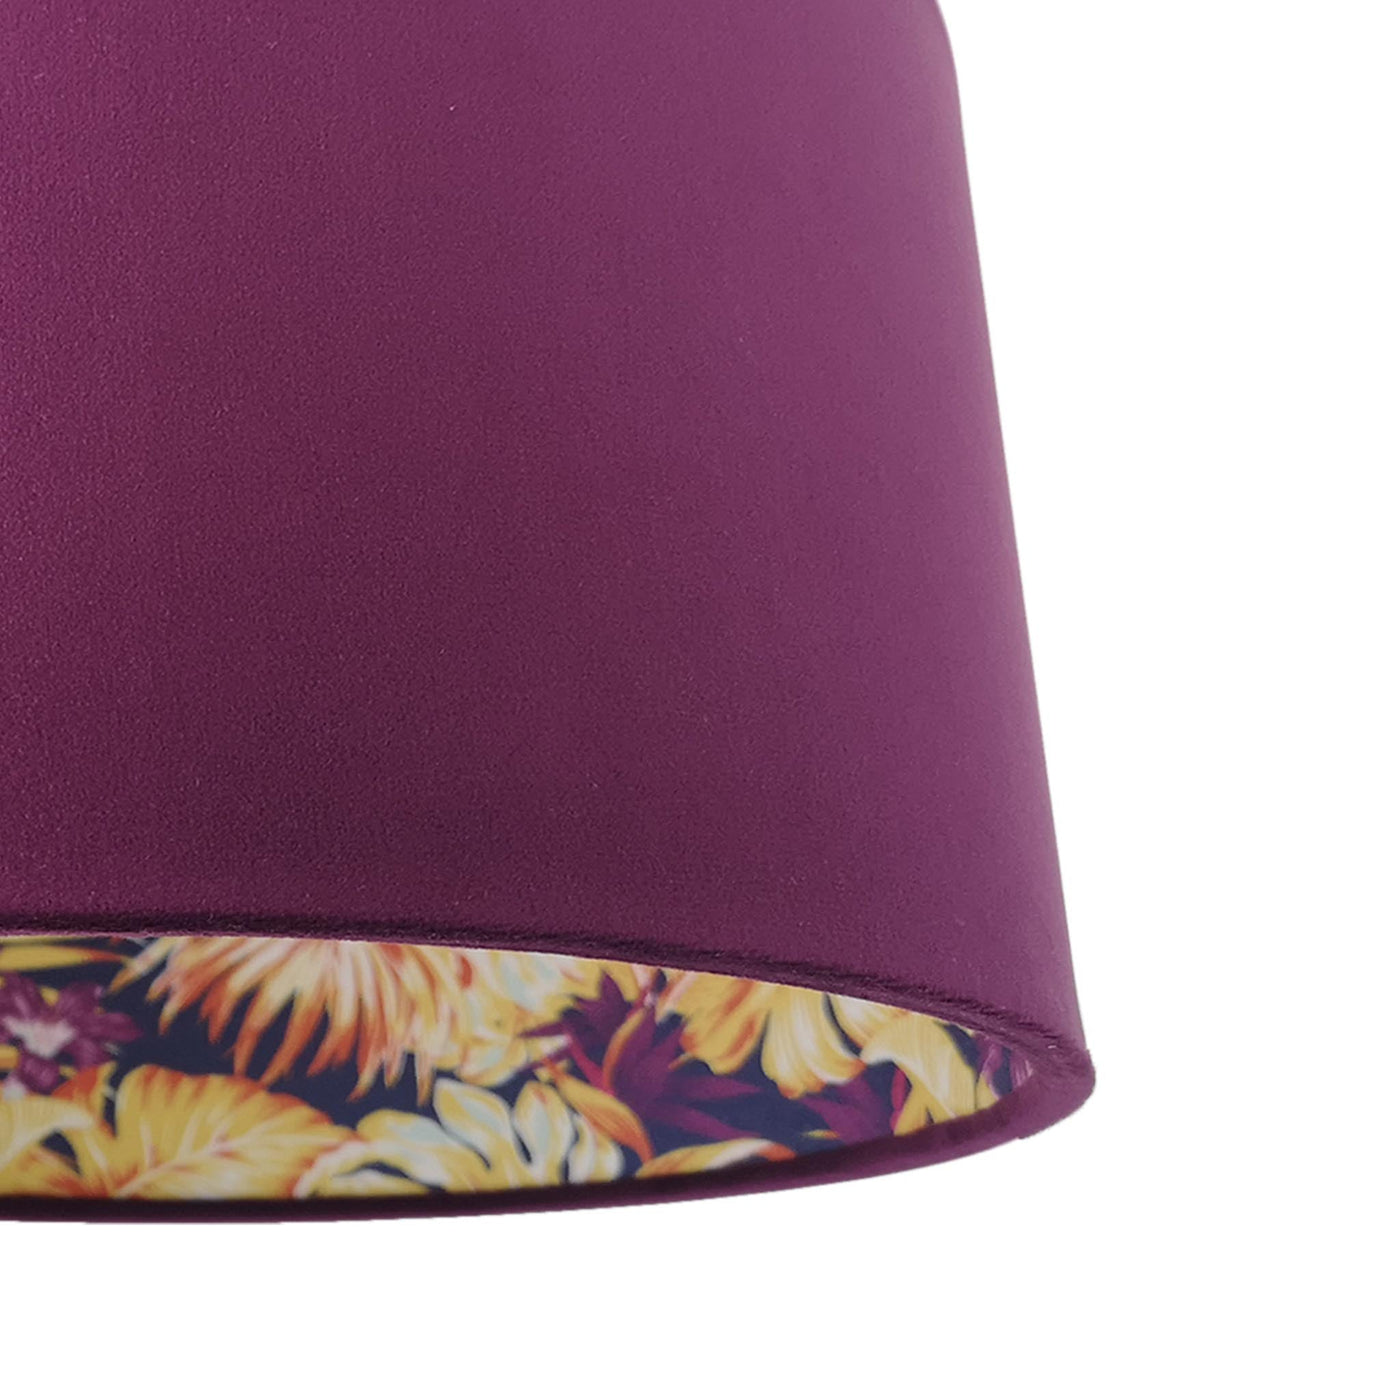 close up of the Purple and Gold Tropical Lampshade in Mulberry Purple Velvet